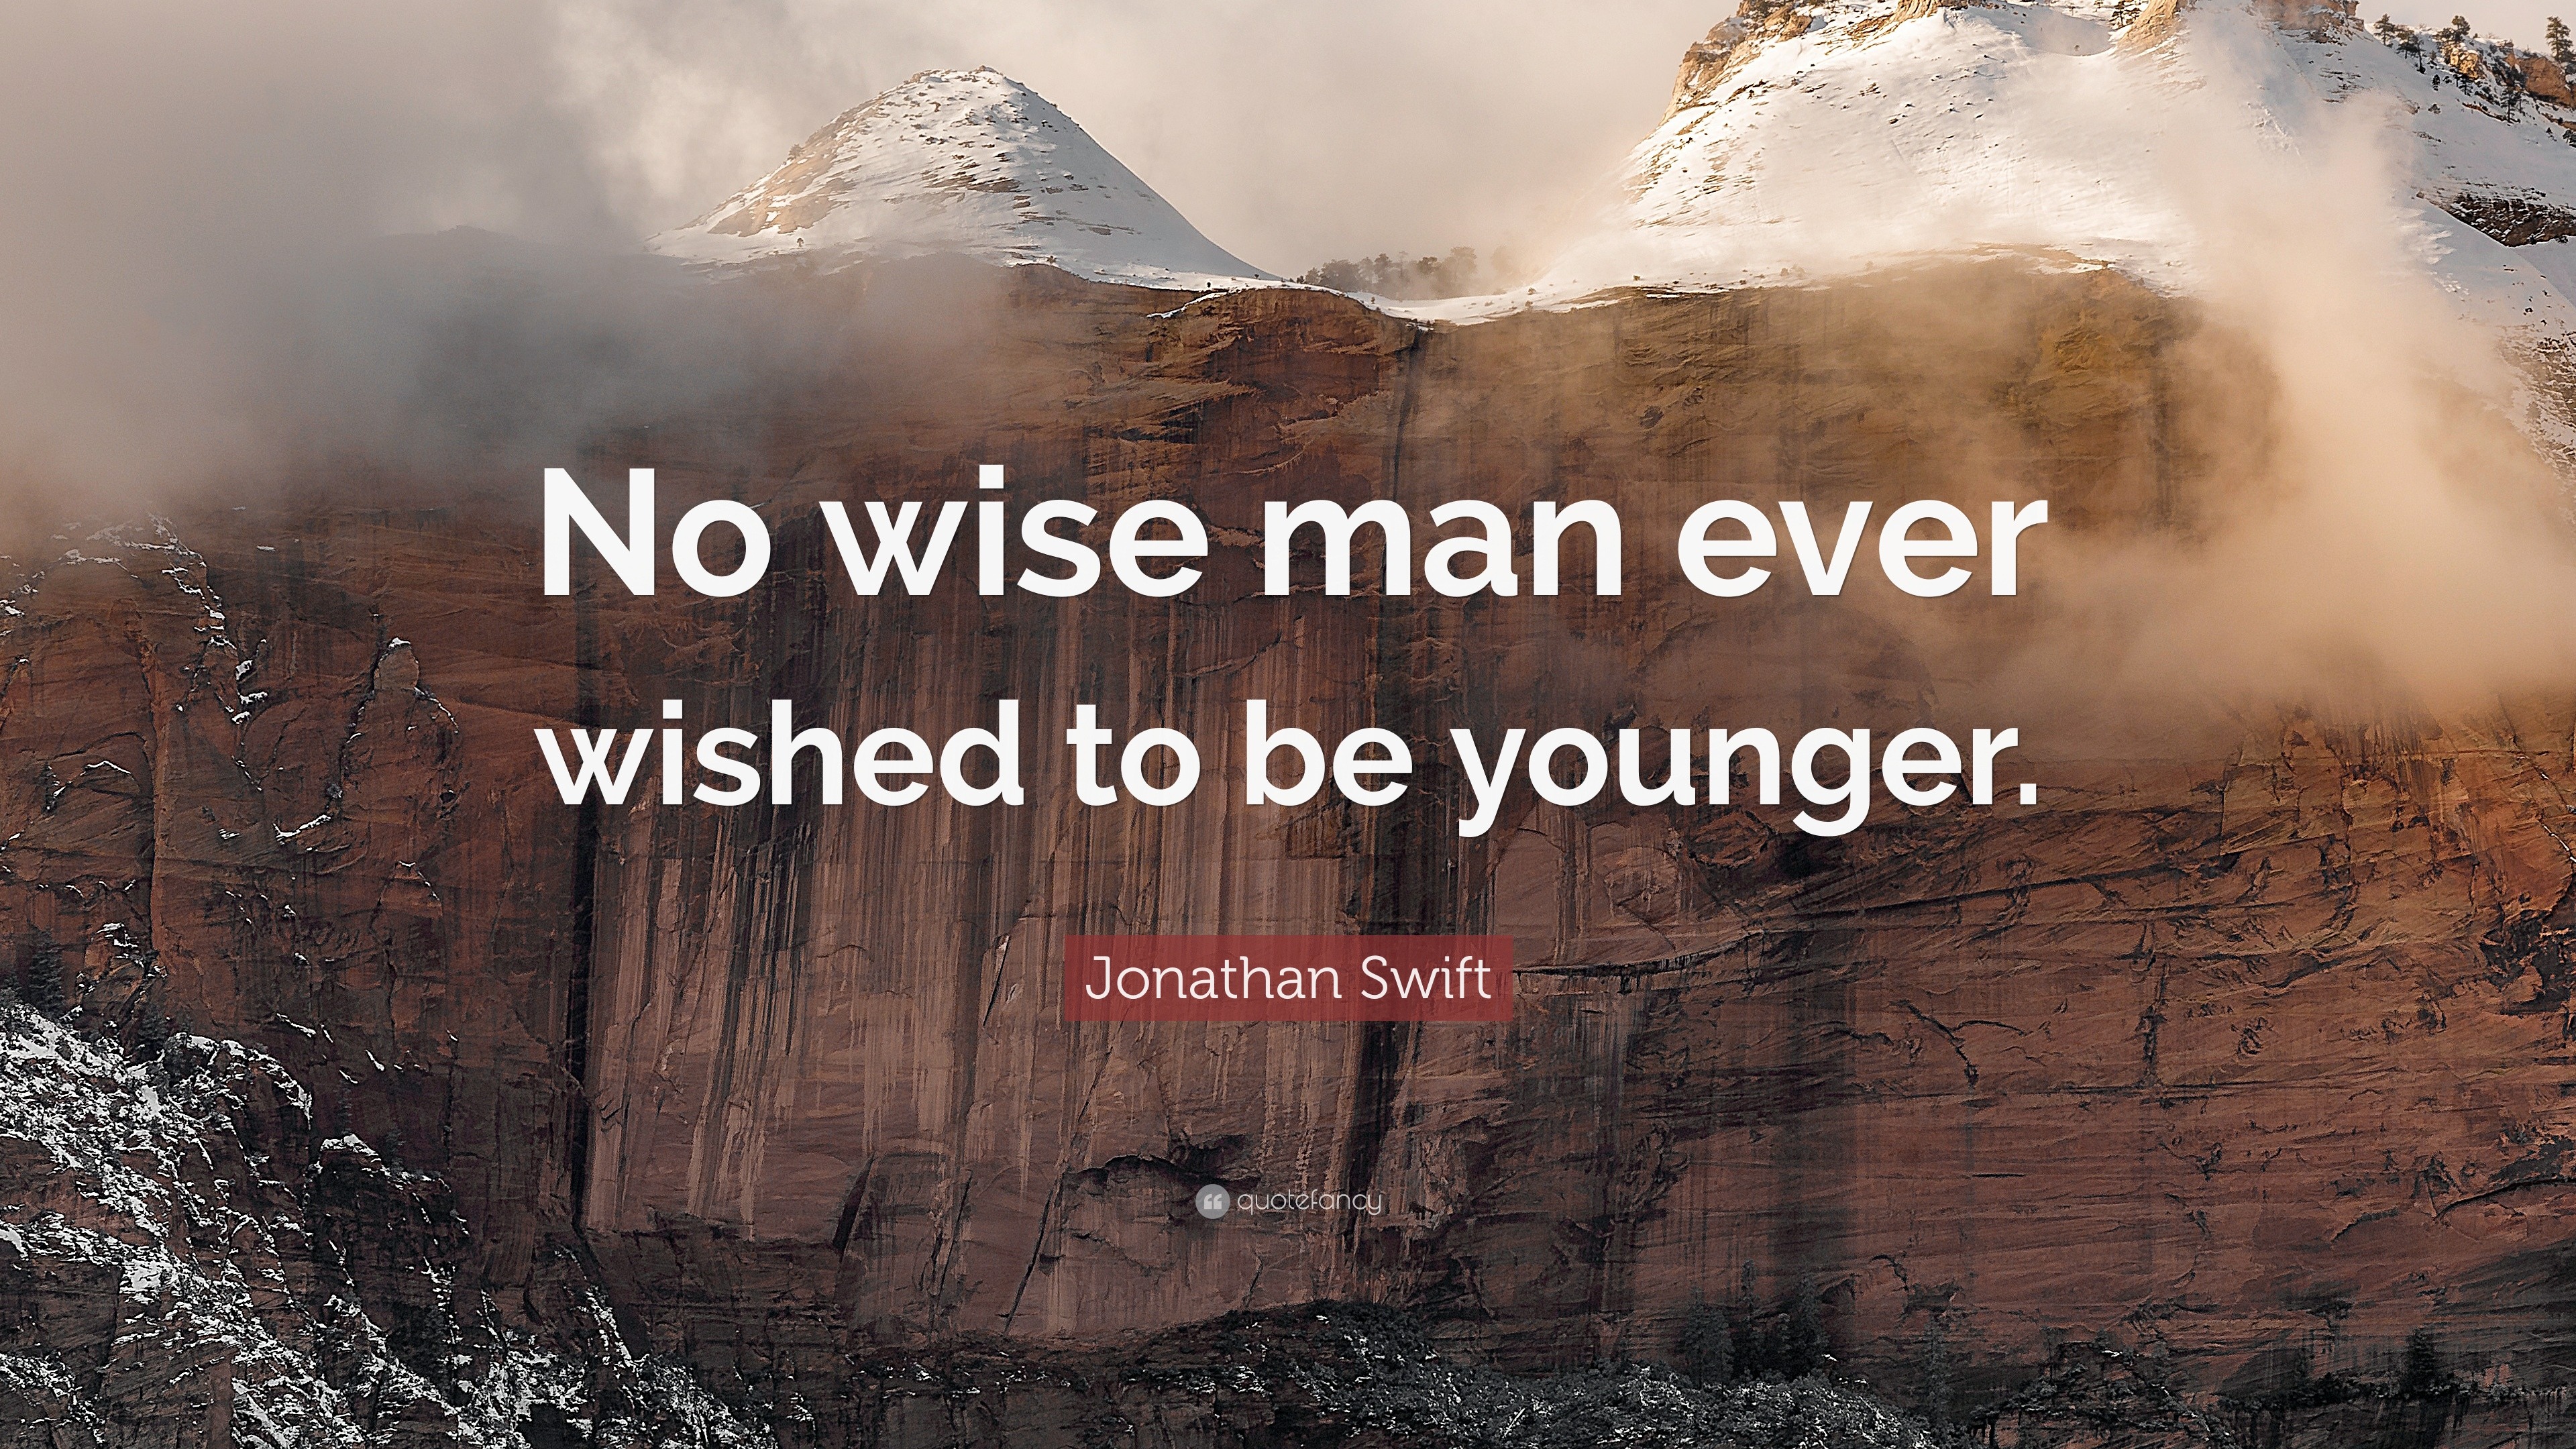 Jonathan Swift Quote “No wise man ever wished to be younger ”